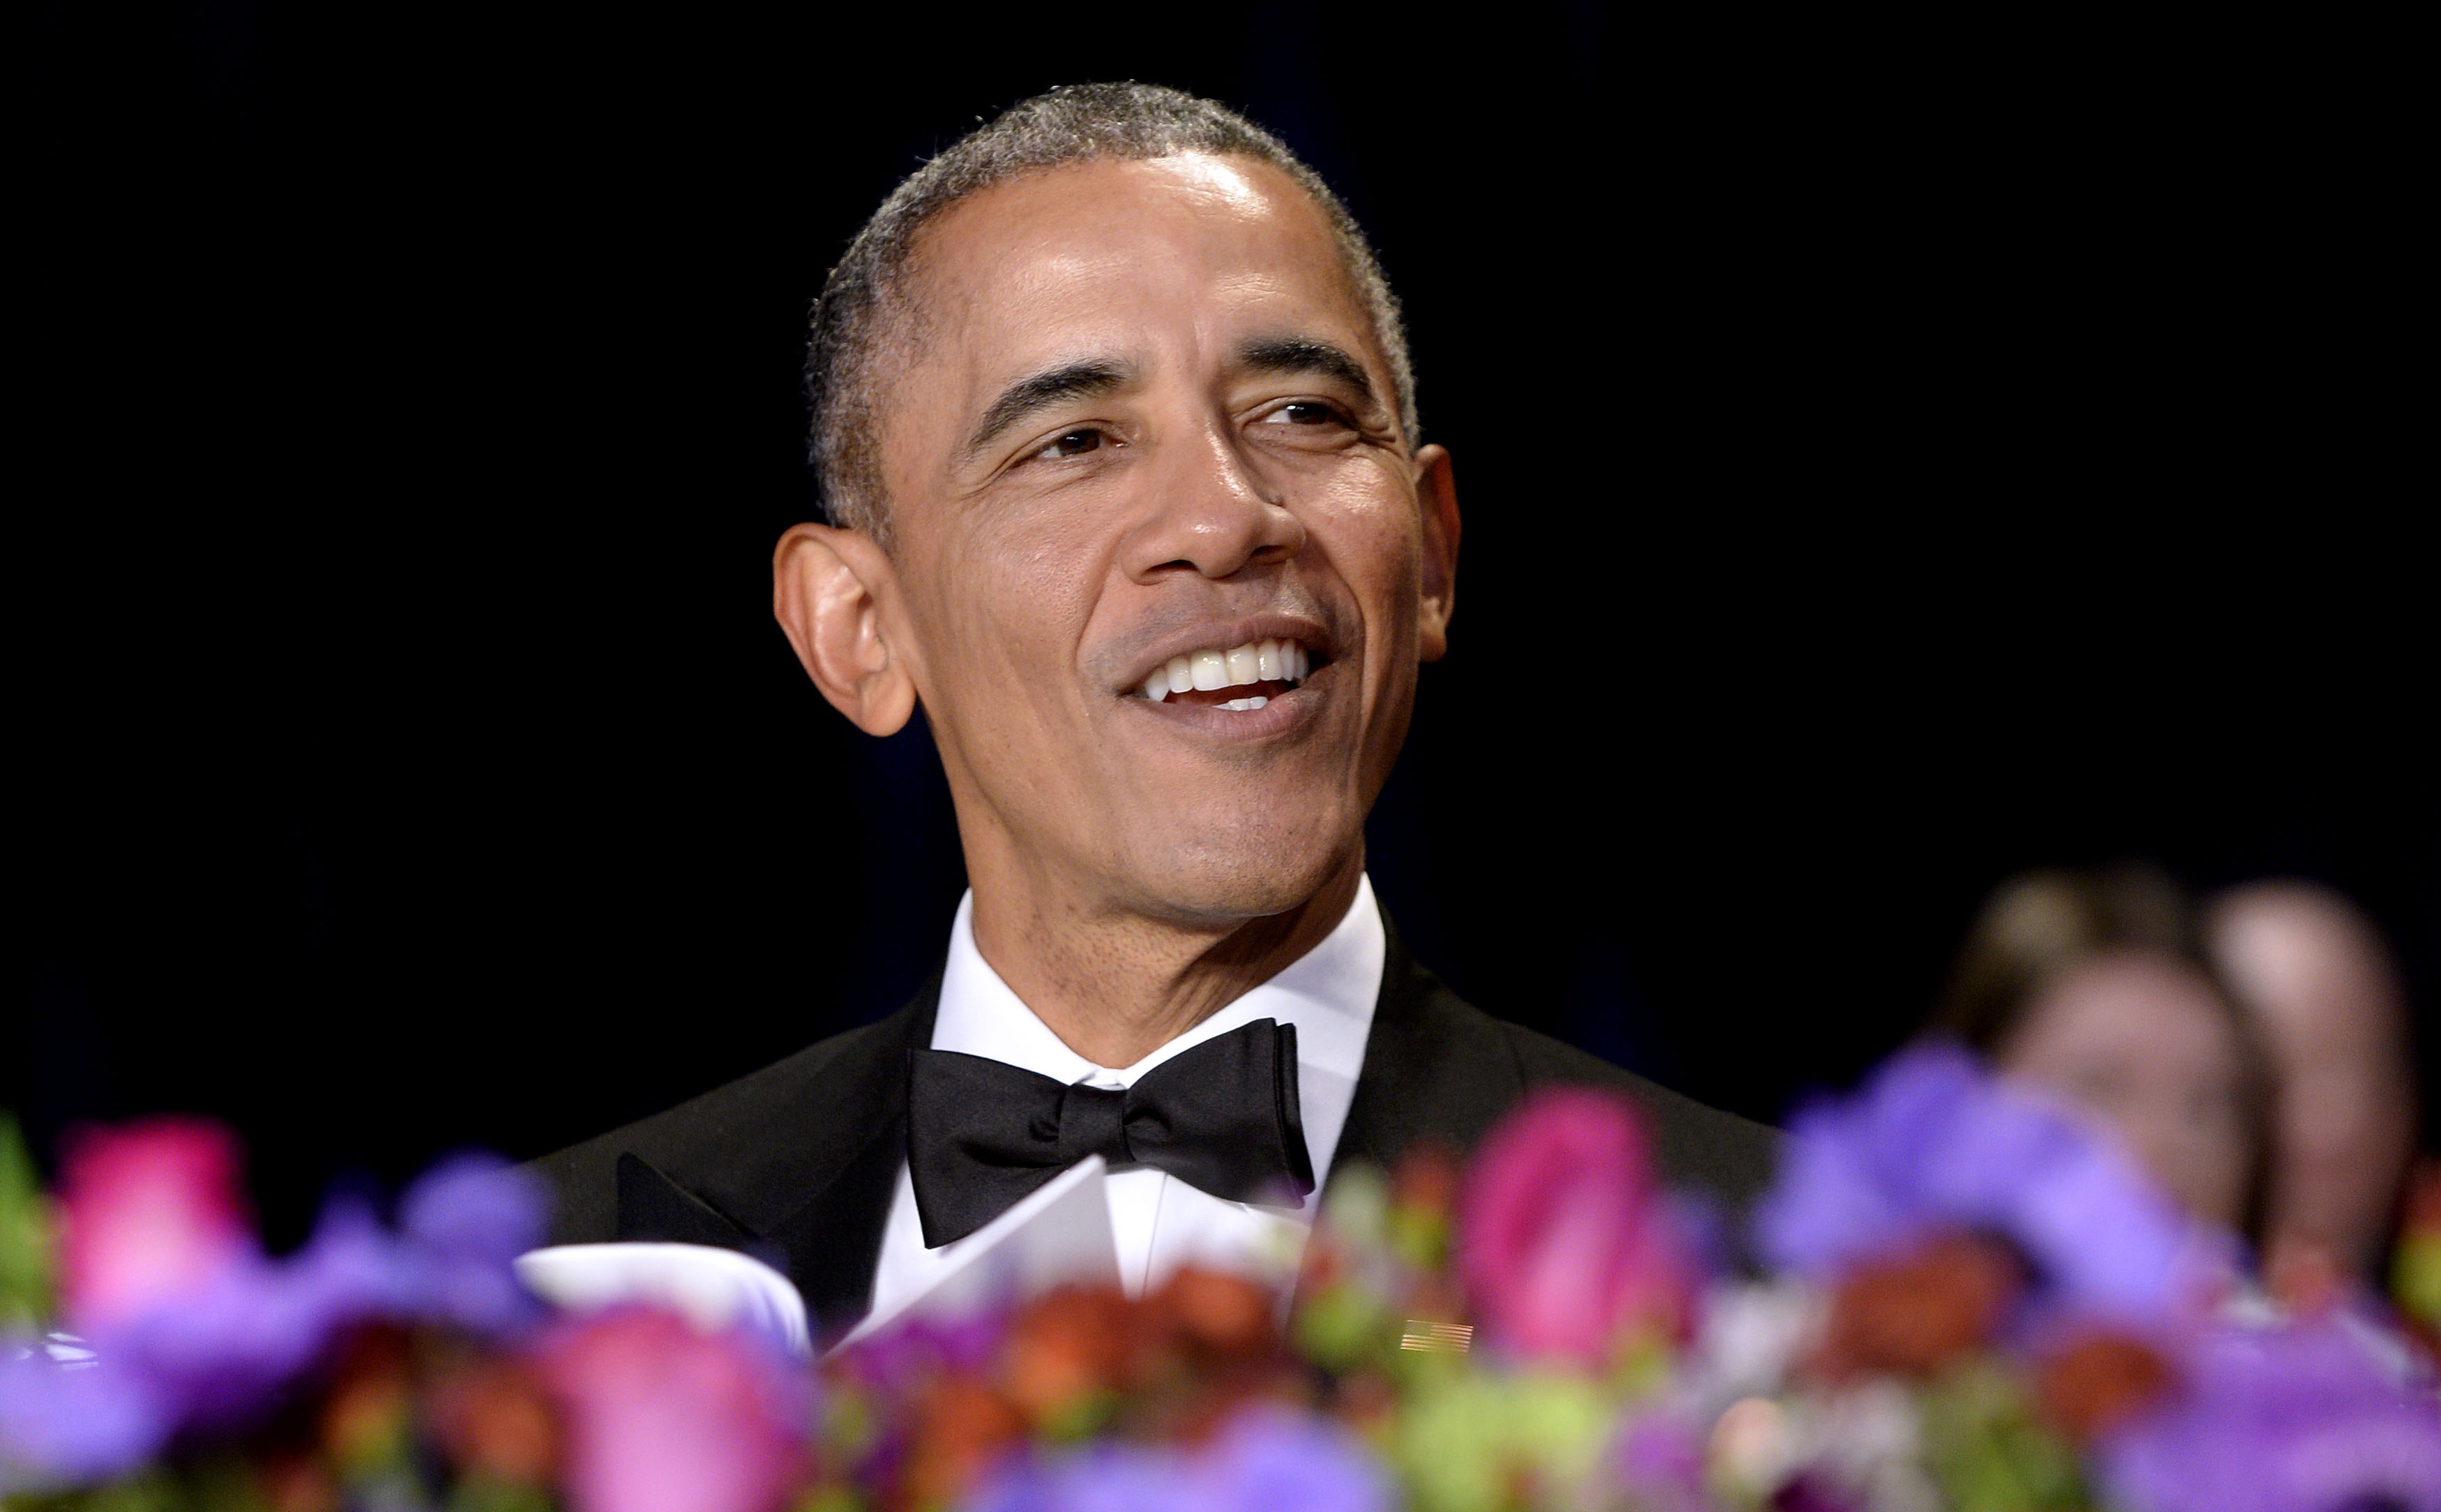 President Barack Obama speaks during the White House Correspondents' Association annual dinner at the Washington Hilton hotel in Washington, D.C., on April 30, 2016. (Pool—Getty Images)